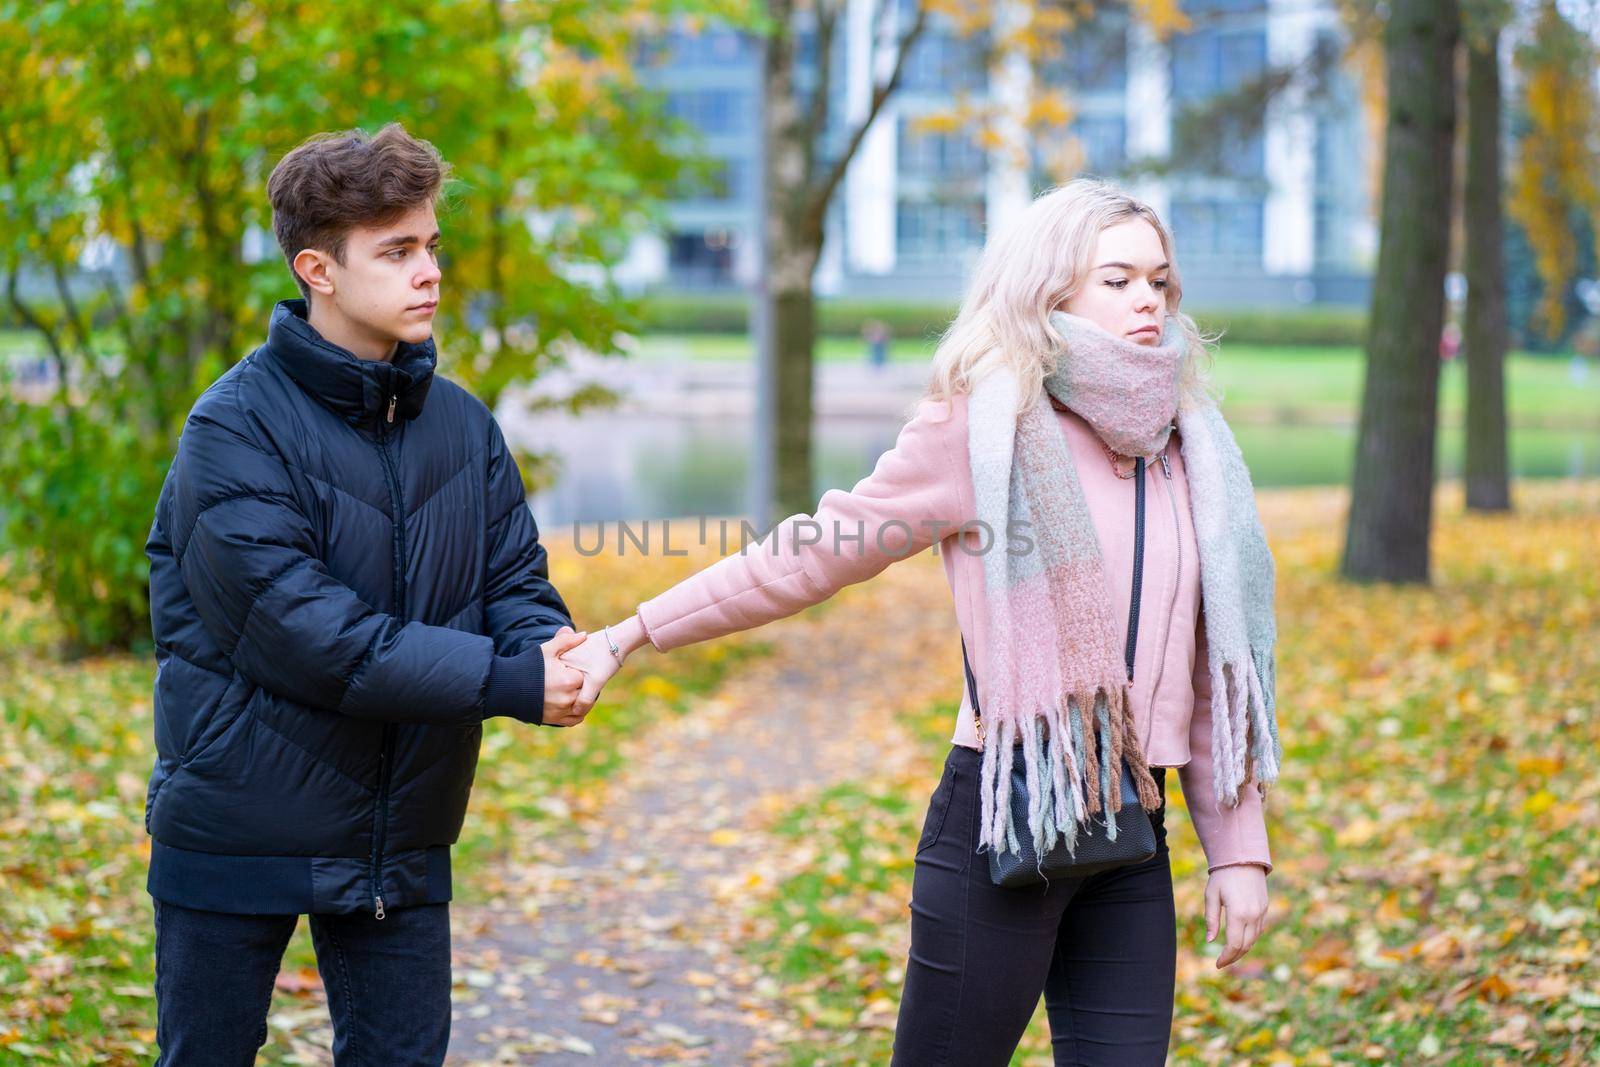 Two teenagers in love in quarrel. The blonde girl takes offense at boy, the guy holds her hand, asks the girl to stay and not leave. Concept of difficulties in adolescent relationships